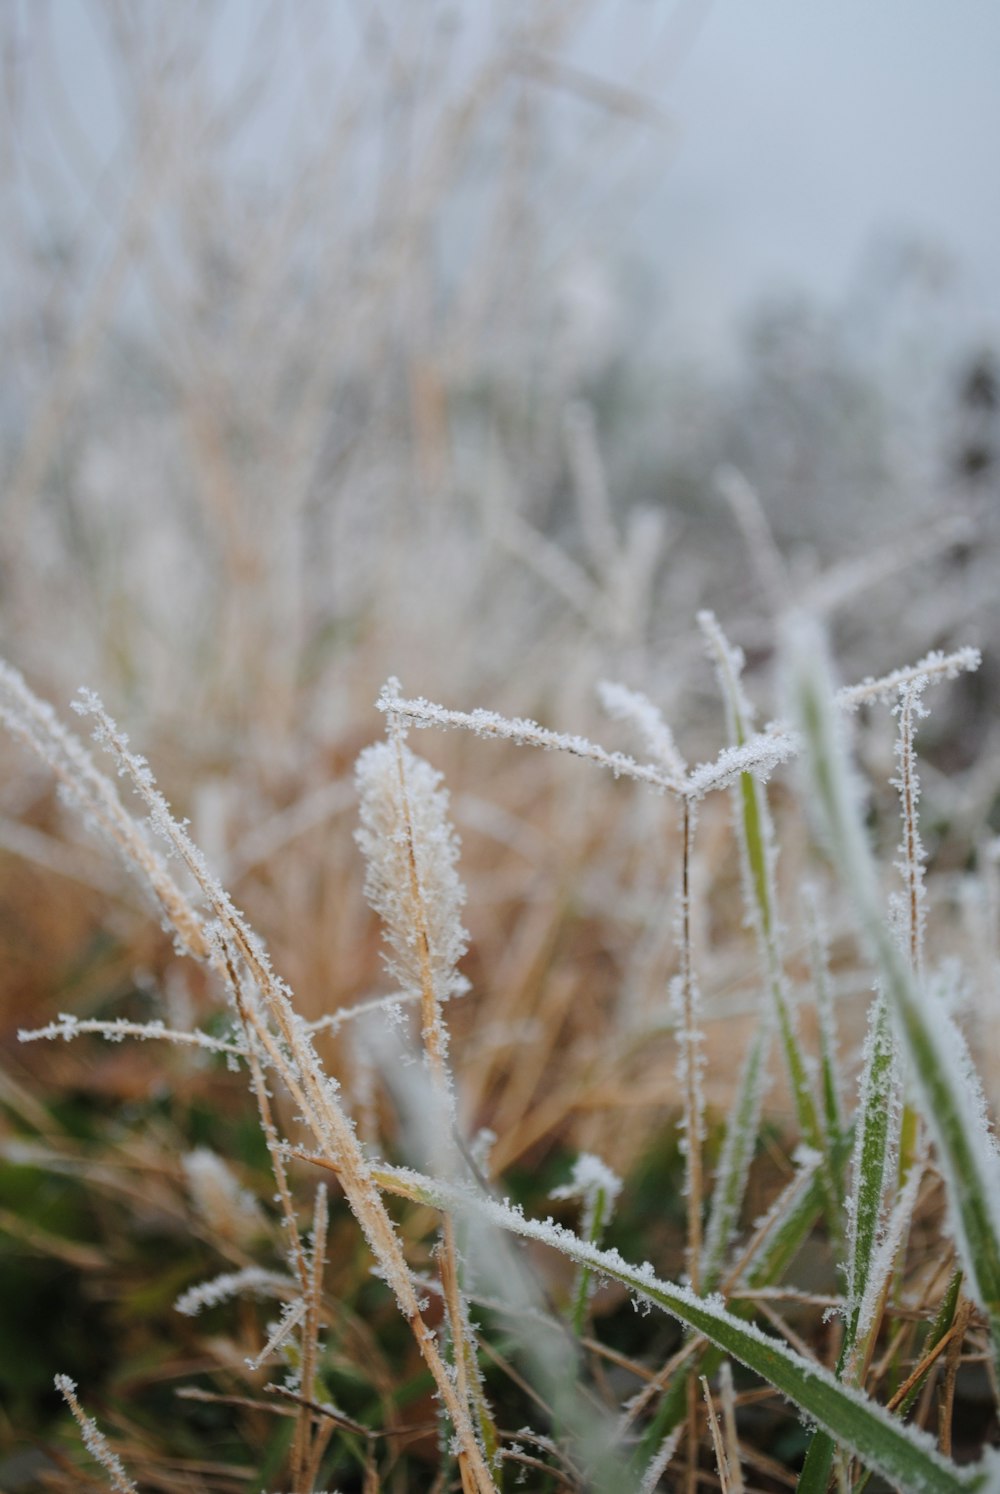 the grass is covered in ice and frost